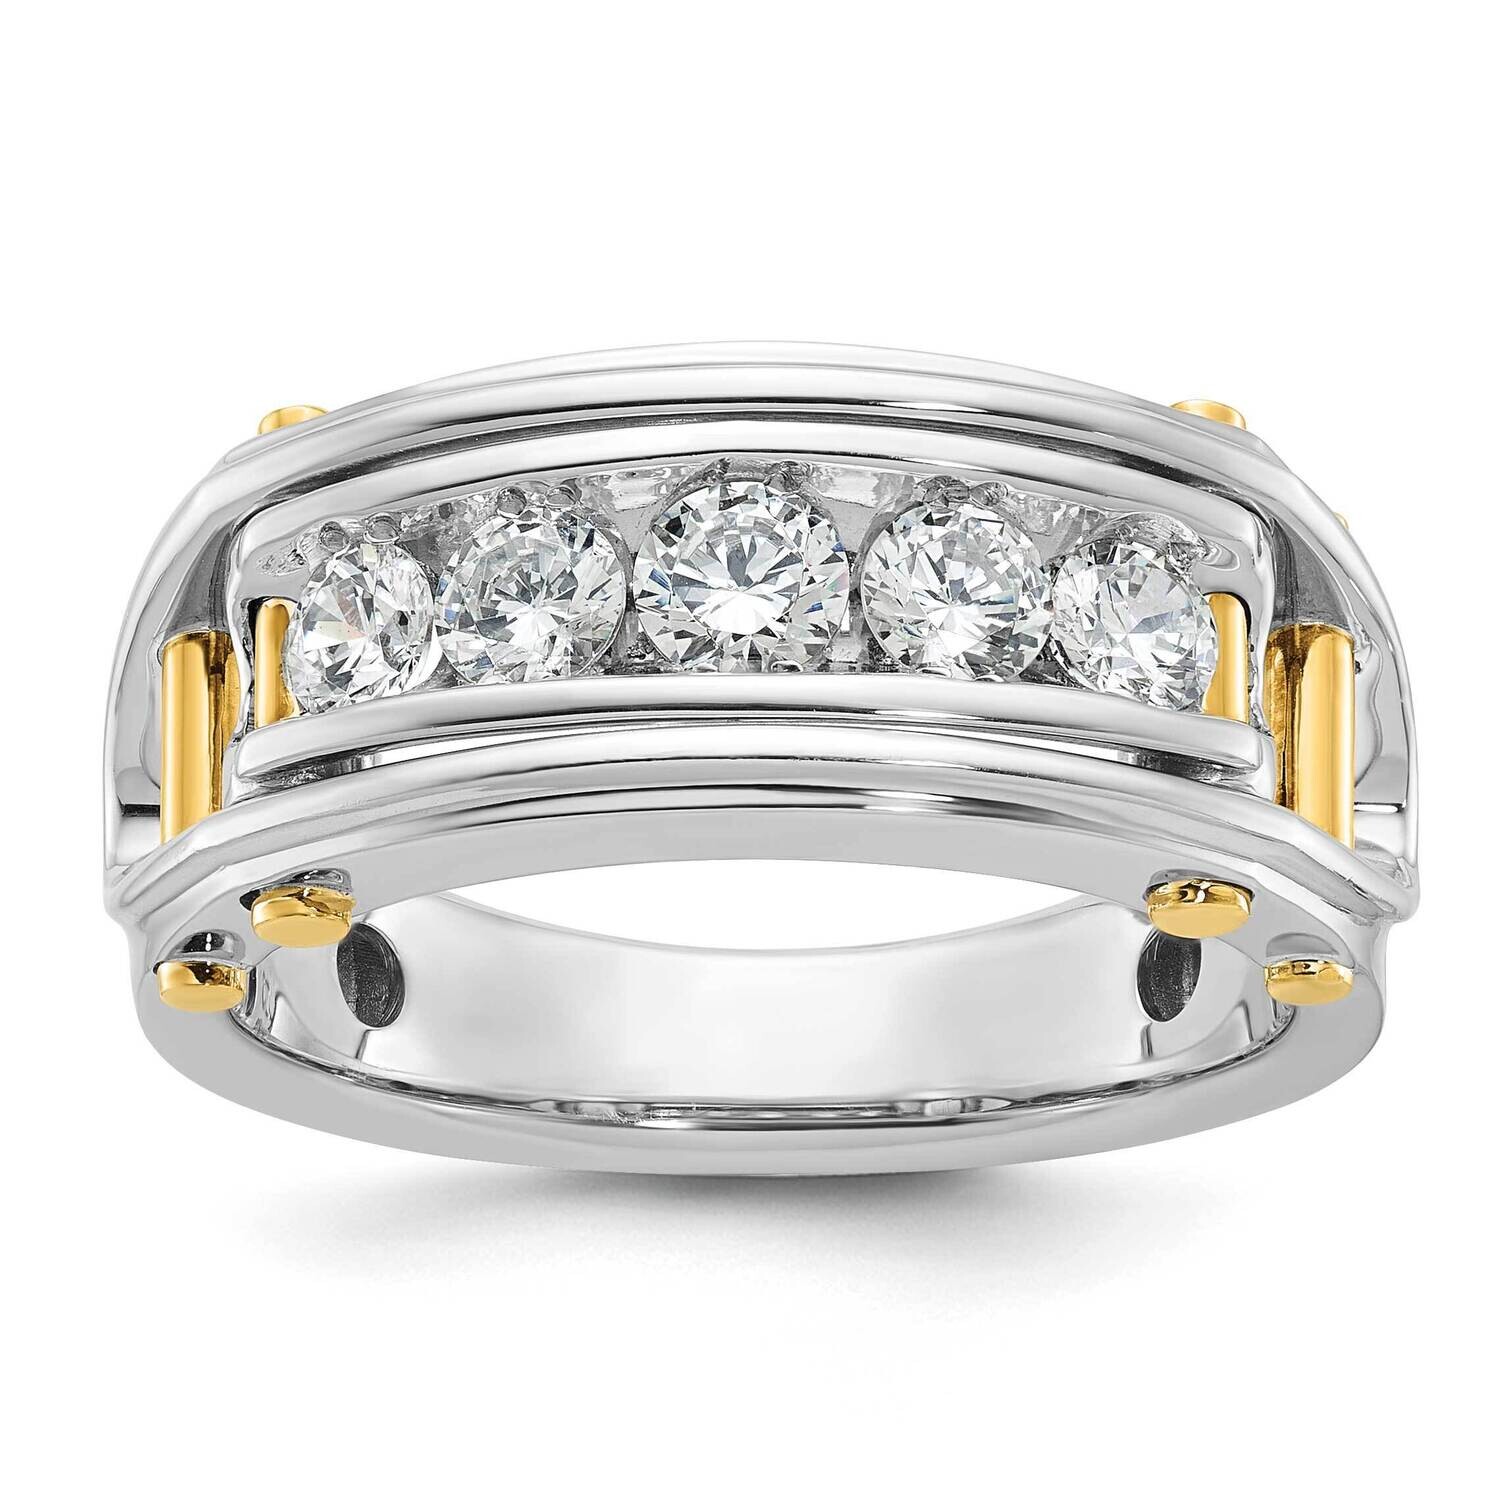 Ibgoodman Men's Polished Grooved Cut-Out 5-Stone Ring Mounting 14k Two-Tone Gold B64088-4WY